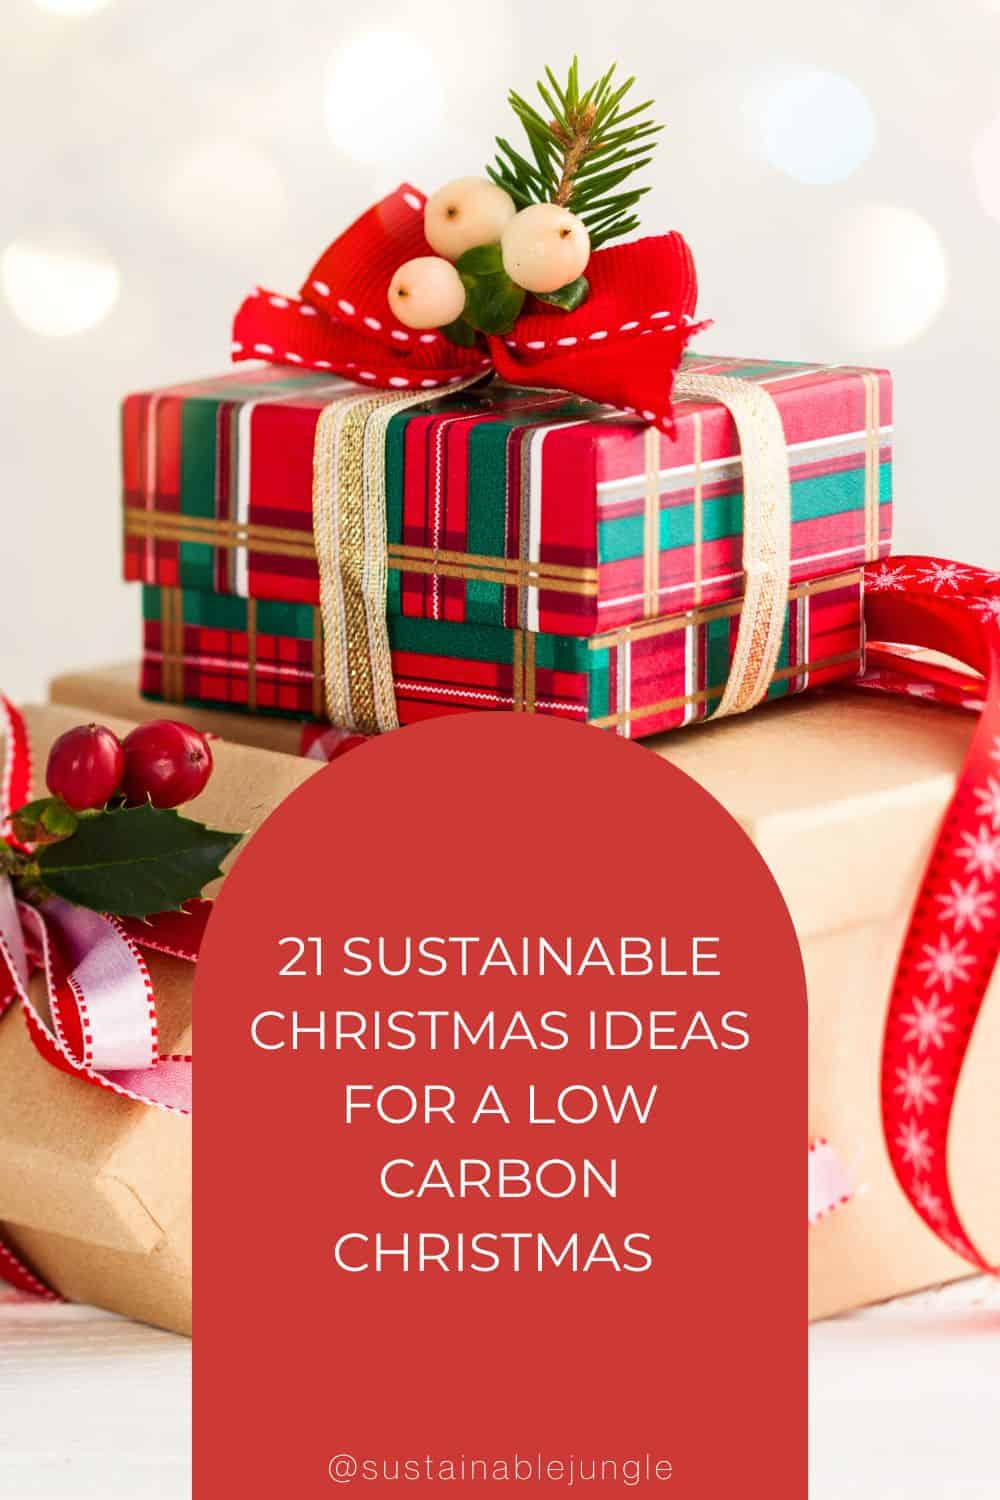 21 Sustainable Christmas Ideas For A Low Carbon Christmas Image by sarsmis #sustainablechristmas #ecofriendlychristmas #sustainablechristmasideas #howtohaveamoresustainablechristmas #tipsforanecofriendlychristmas #sustainablejungle